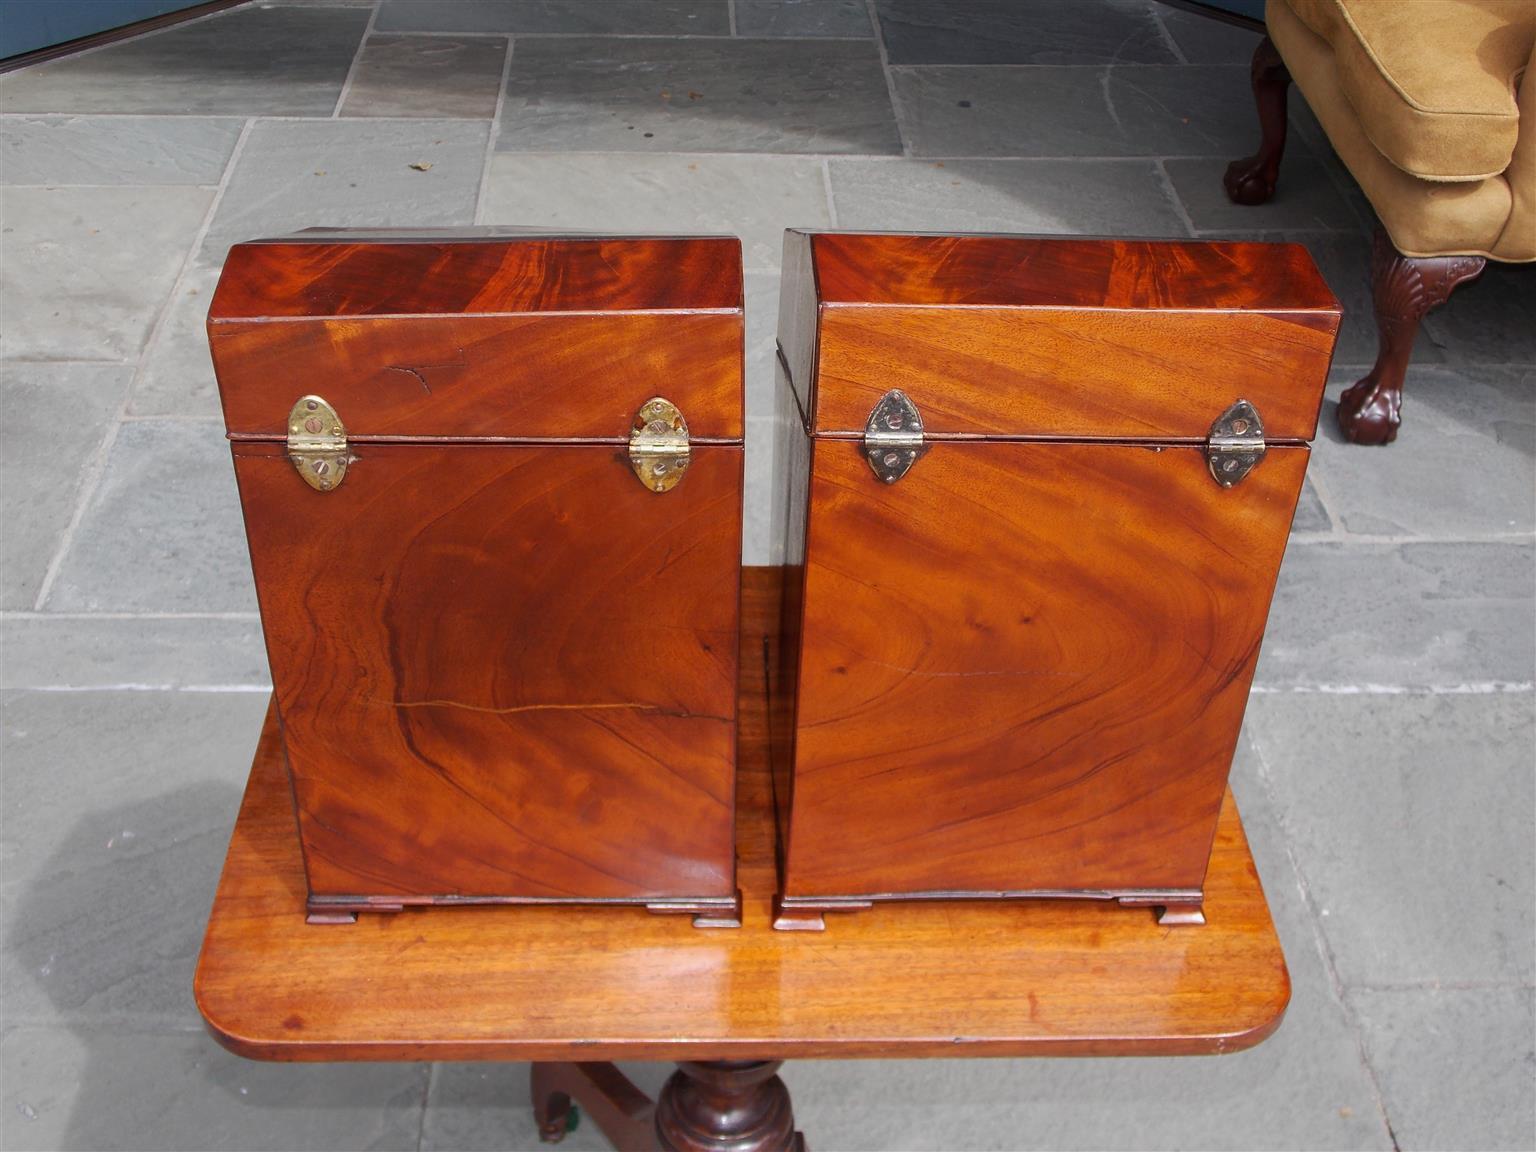 Pair of American Mahogany Serpentine Cutlery Boxes with Silver Mounts , C. 1790 5